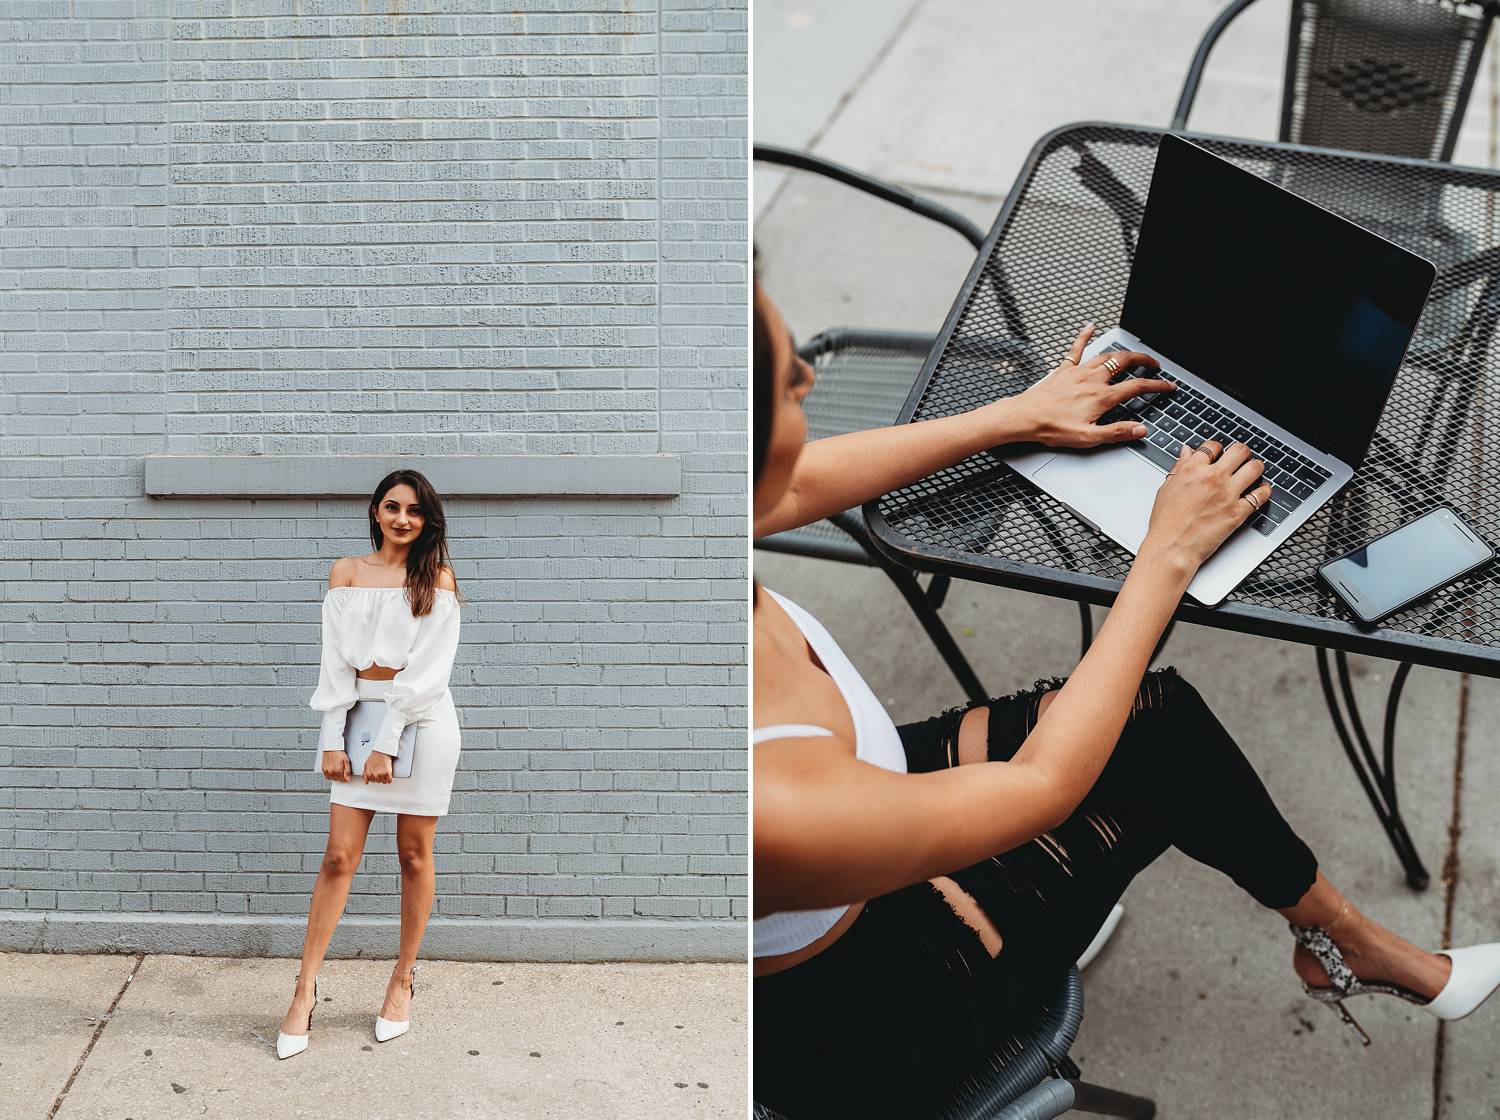 A female entrepreneur is photographed for a personal branding session. In one frame, she wears a white dress and holds her laptop in front of her. In the next photo, she sits at a cafe table working on her open laptop.